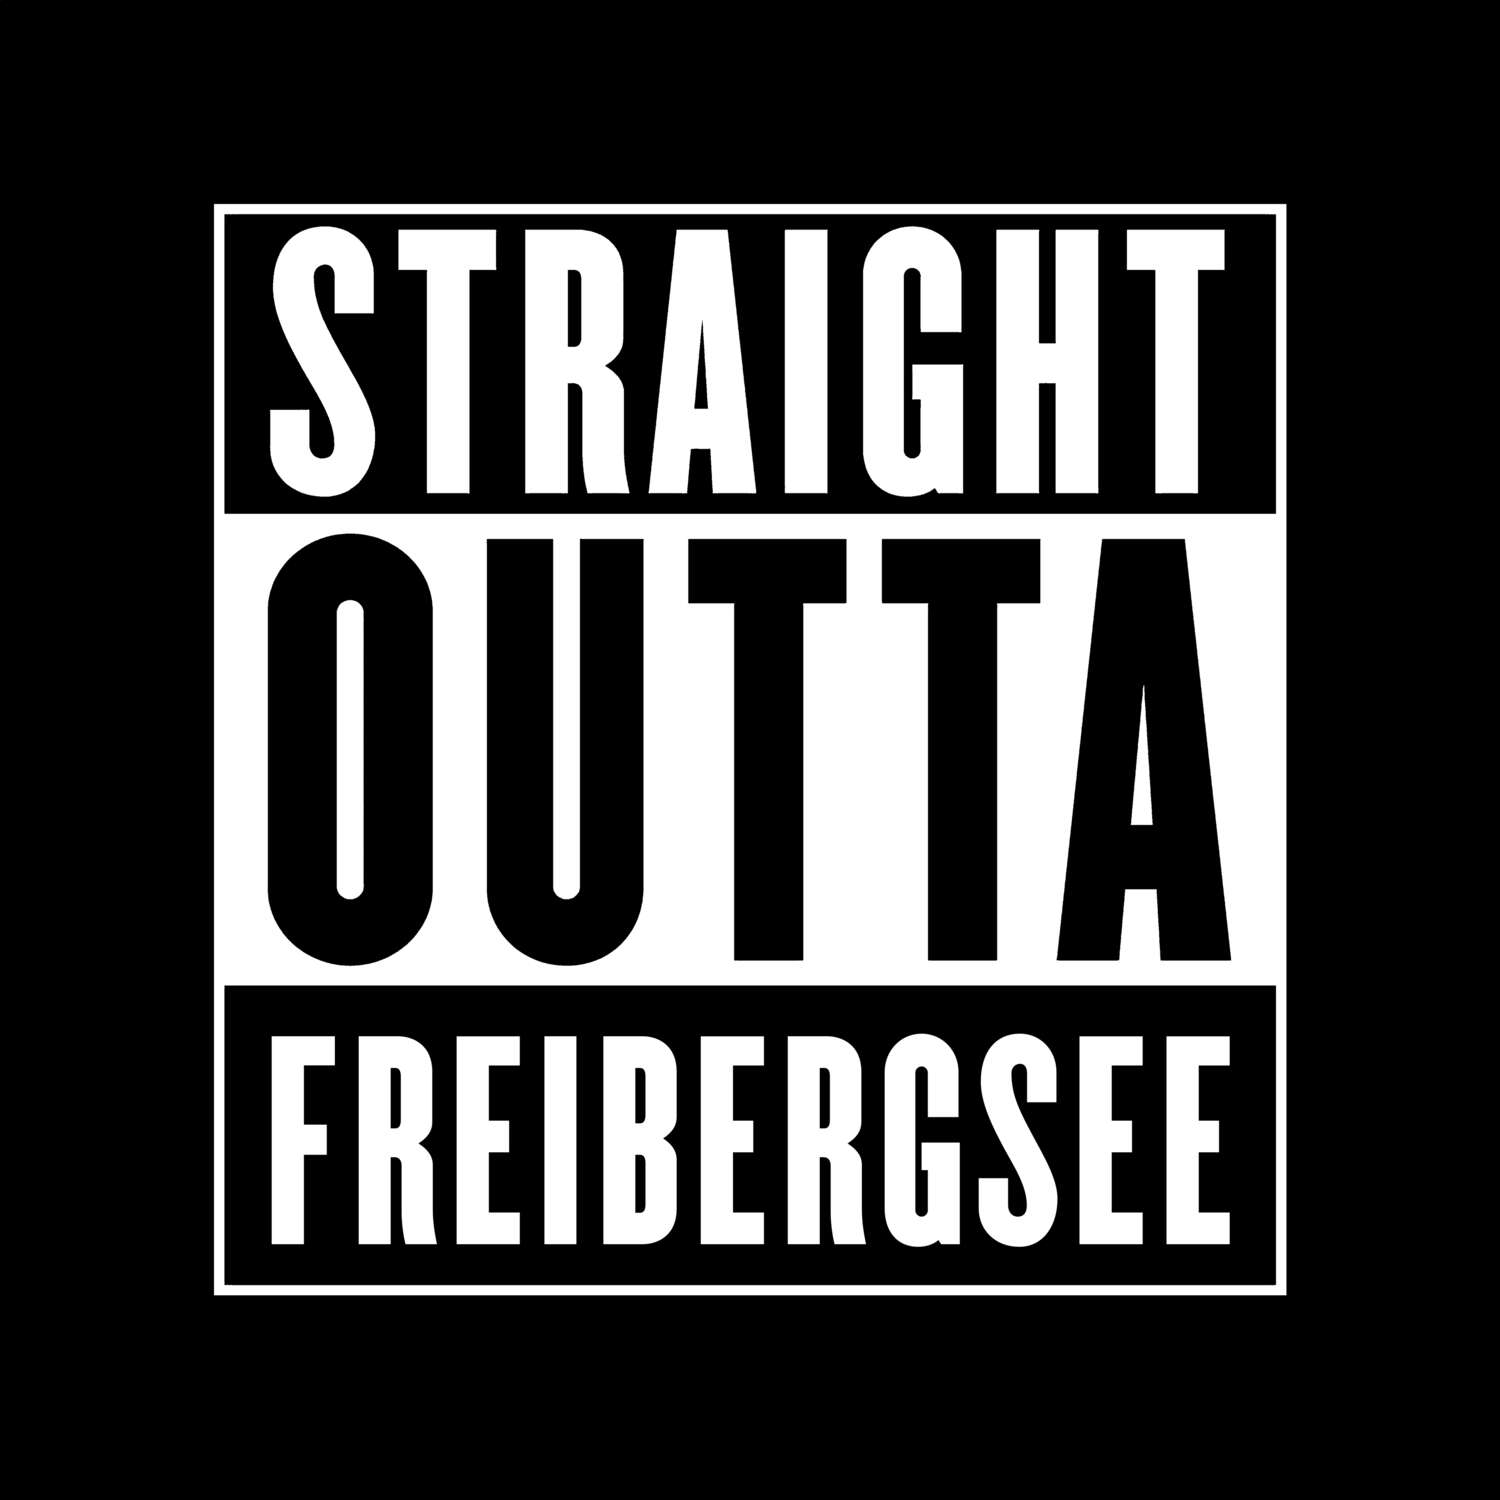 Freibergsee T-Shirt »Straight Outta«